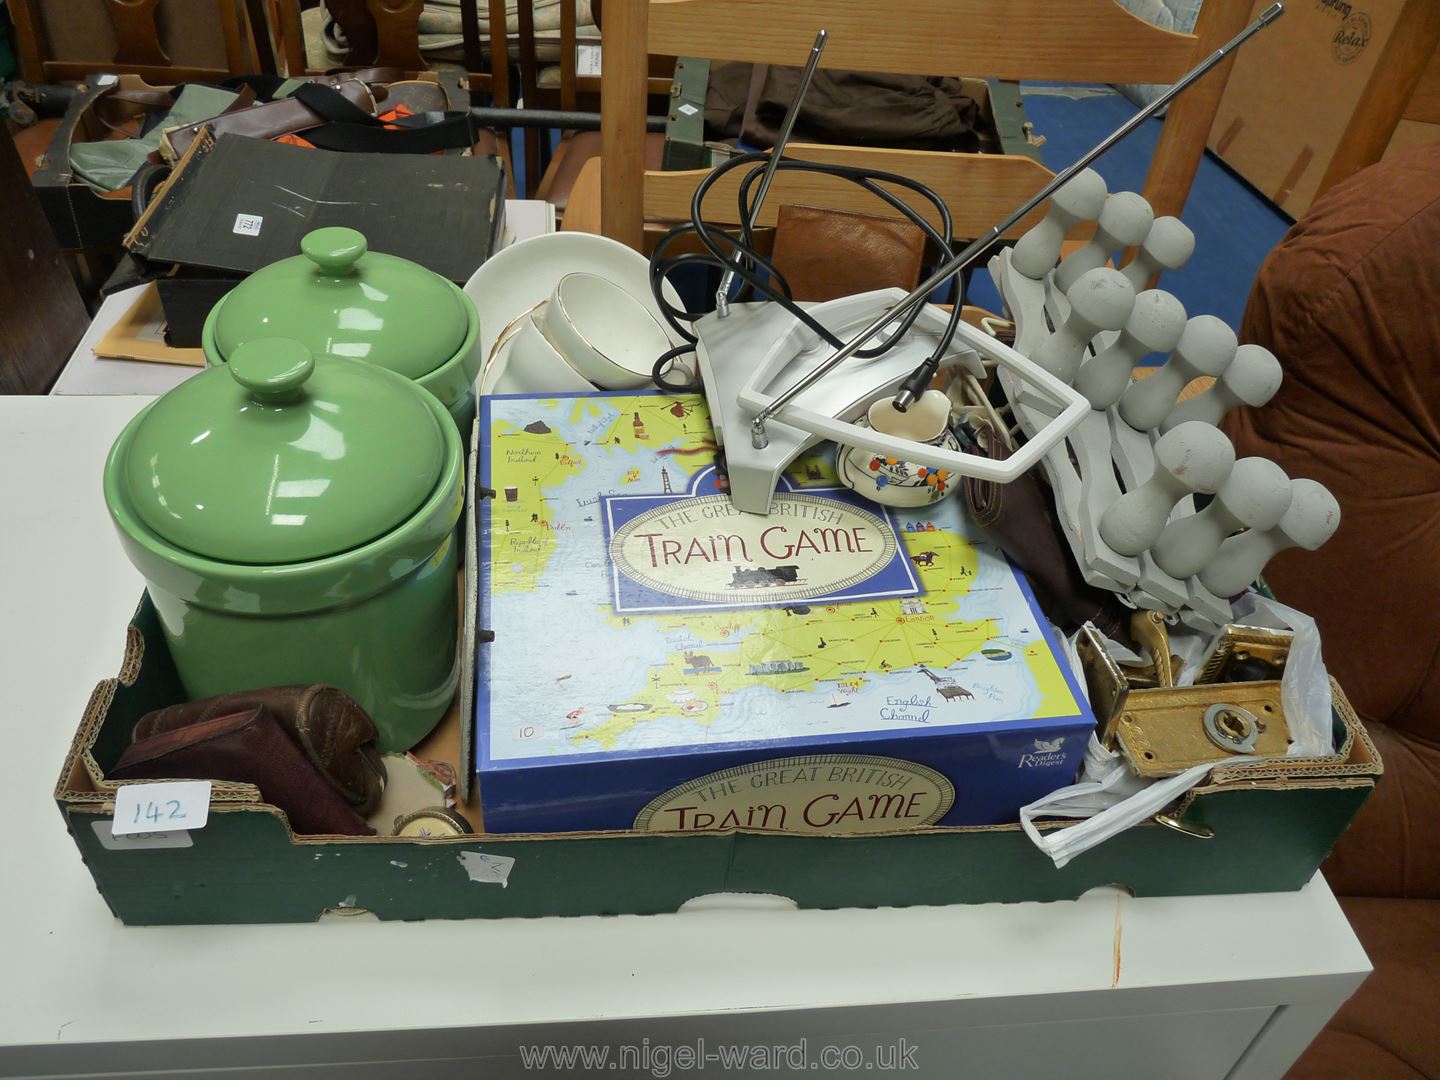 A box of ornaments, train game and kitchen canisters.